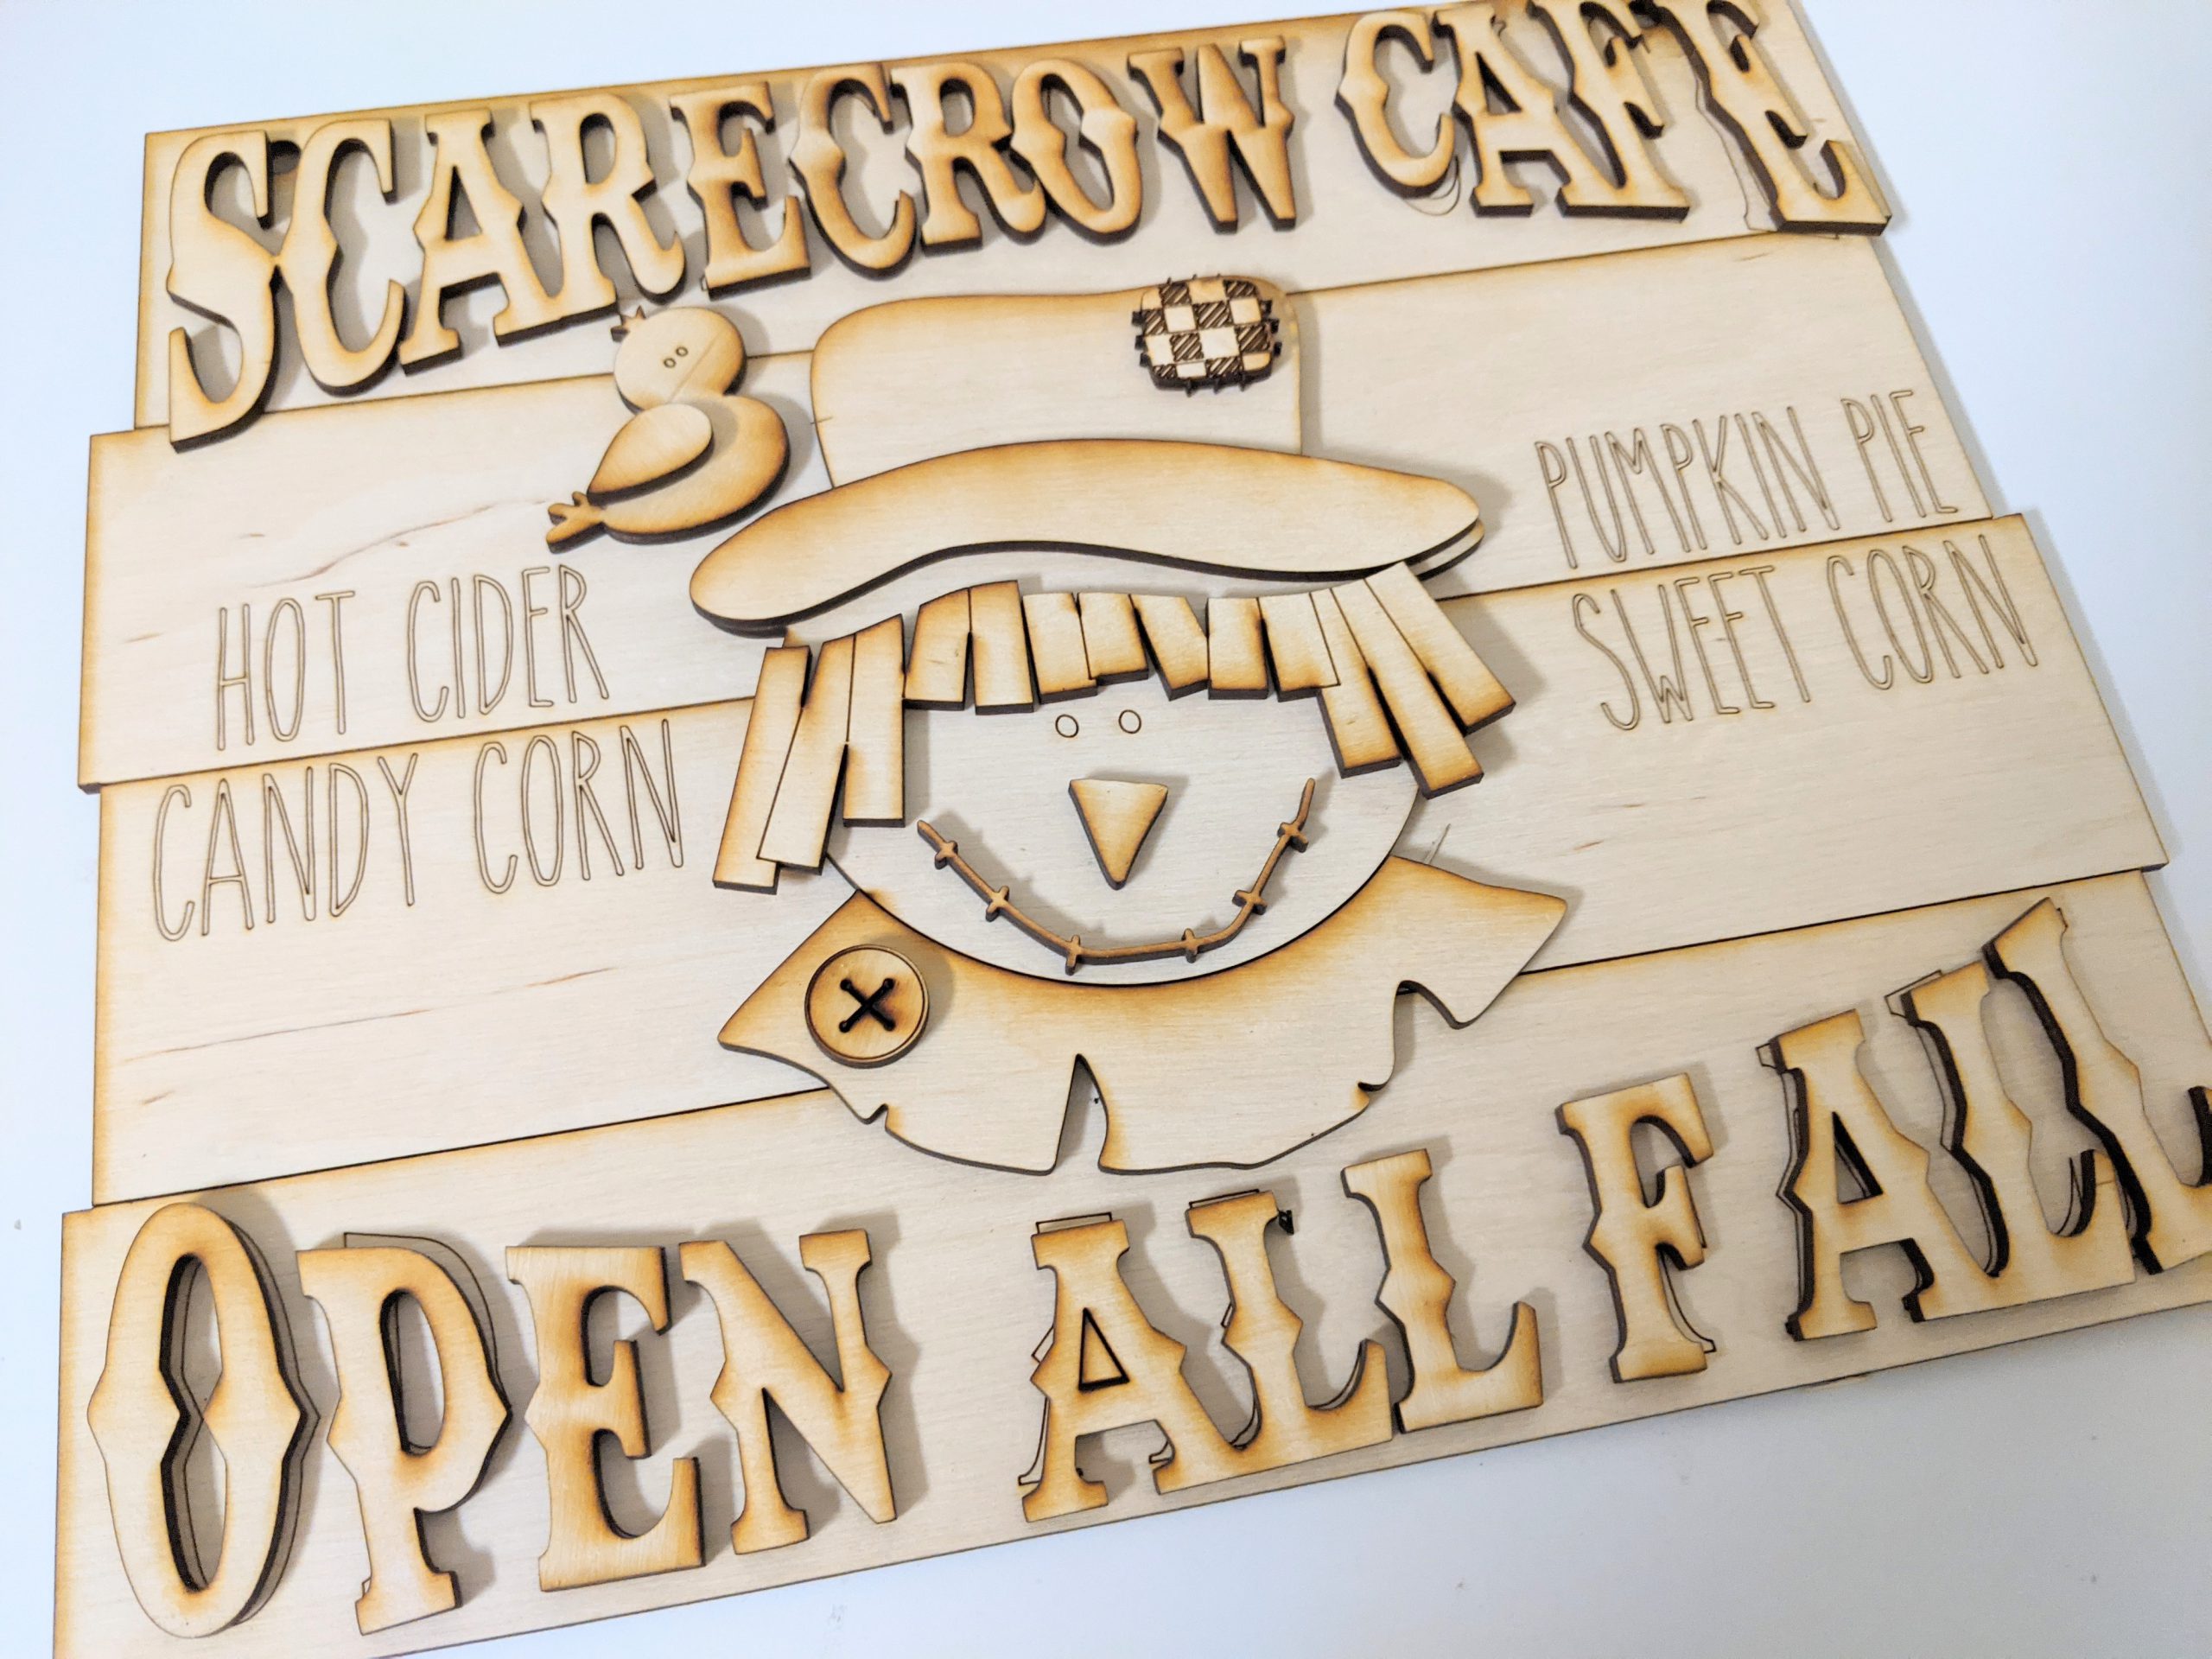 Scarecrow Cafe Sign - MyMakerscape